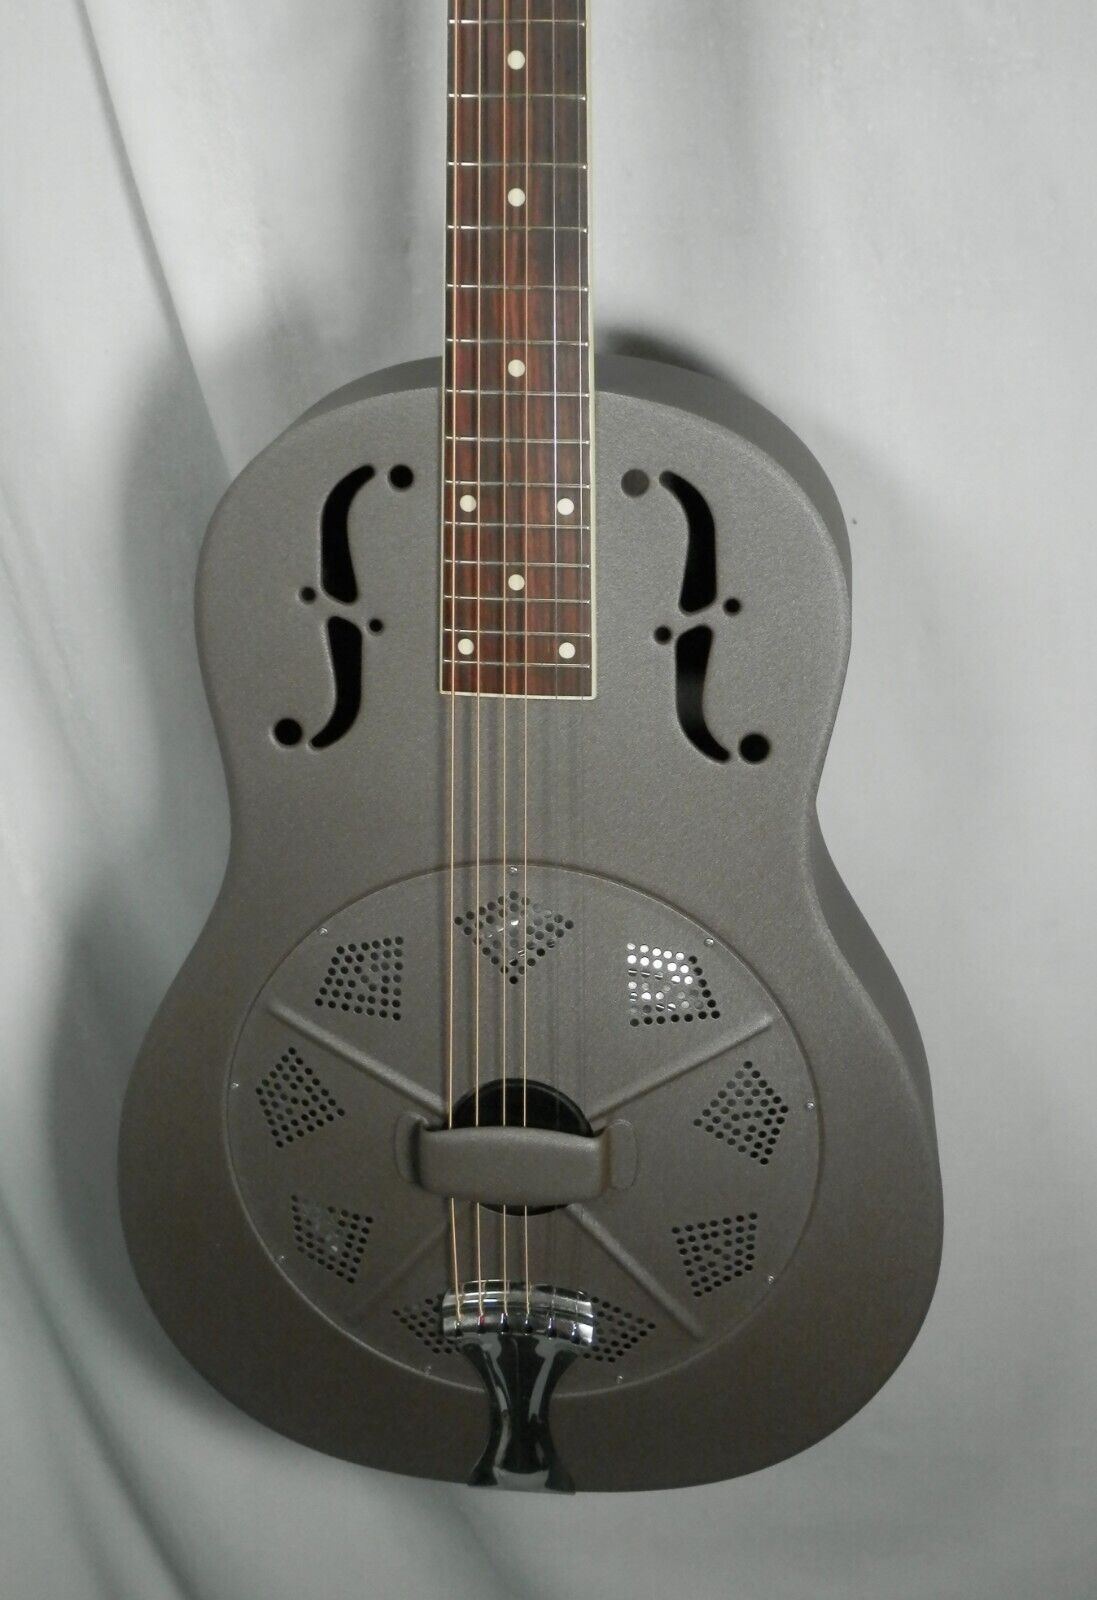 National Delphi Resonator Acoustic Guitar with case used Taupe Finish 10